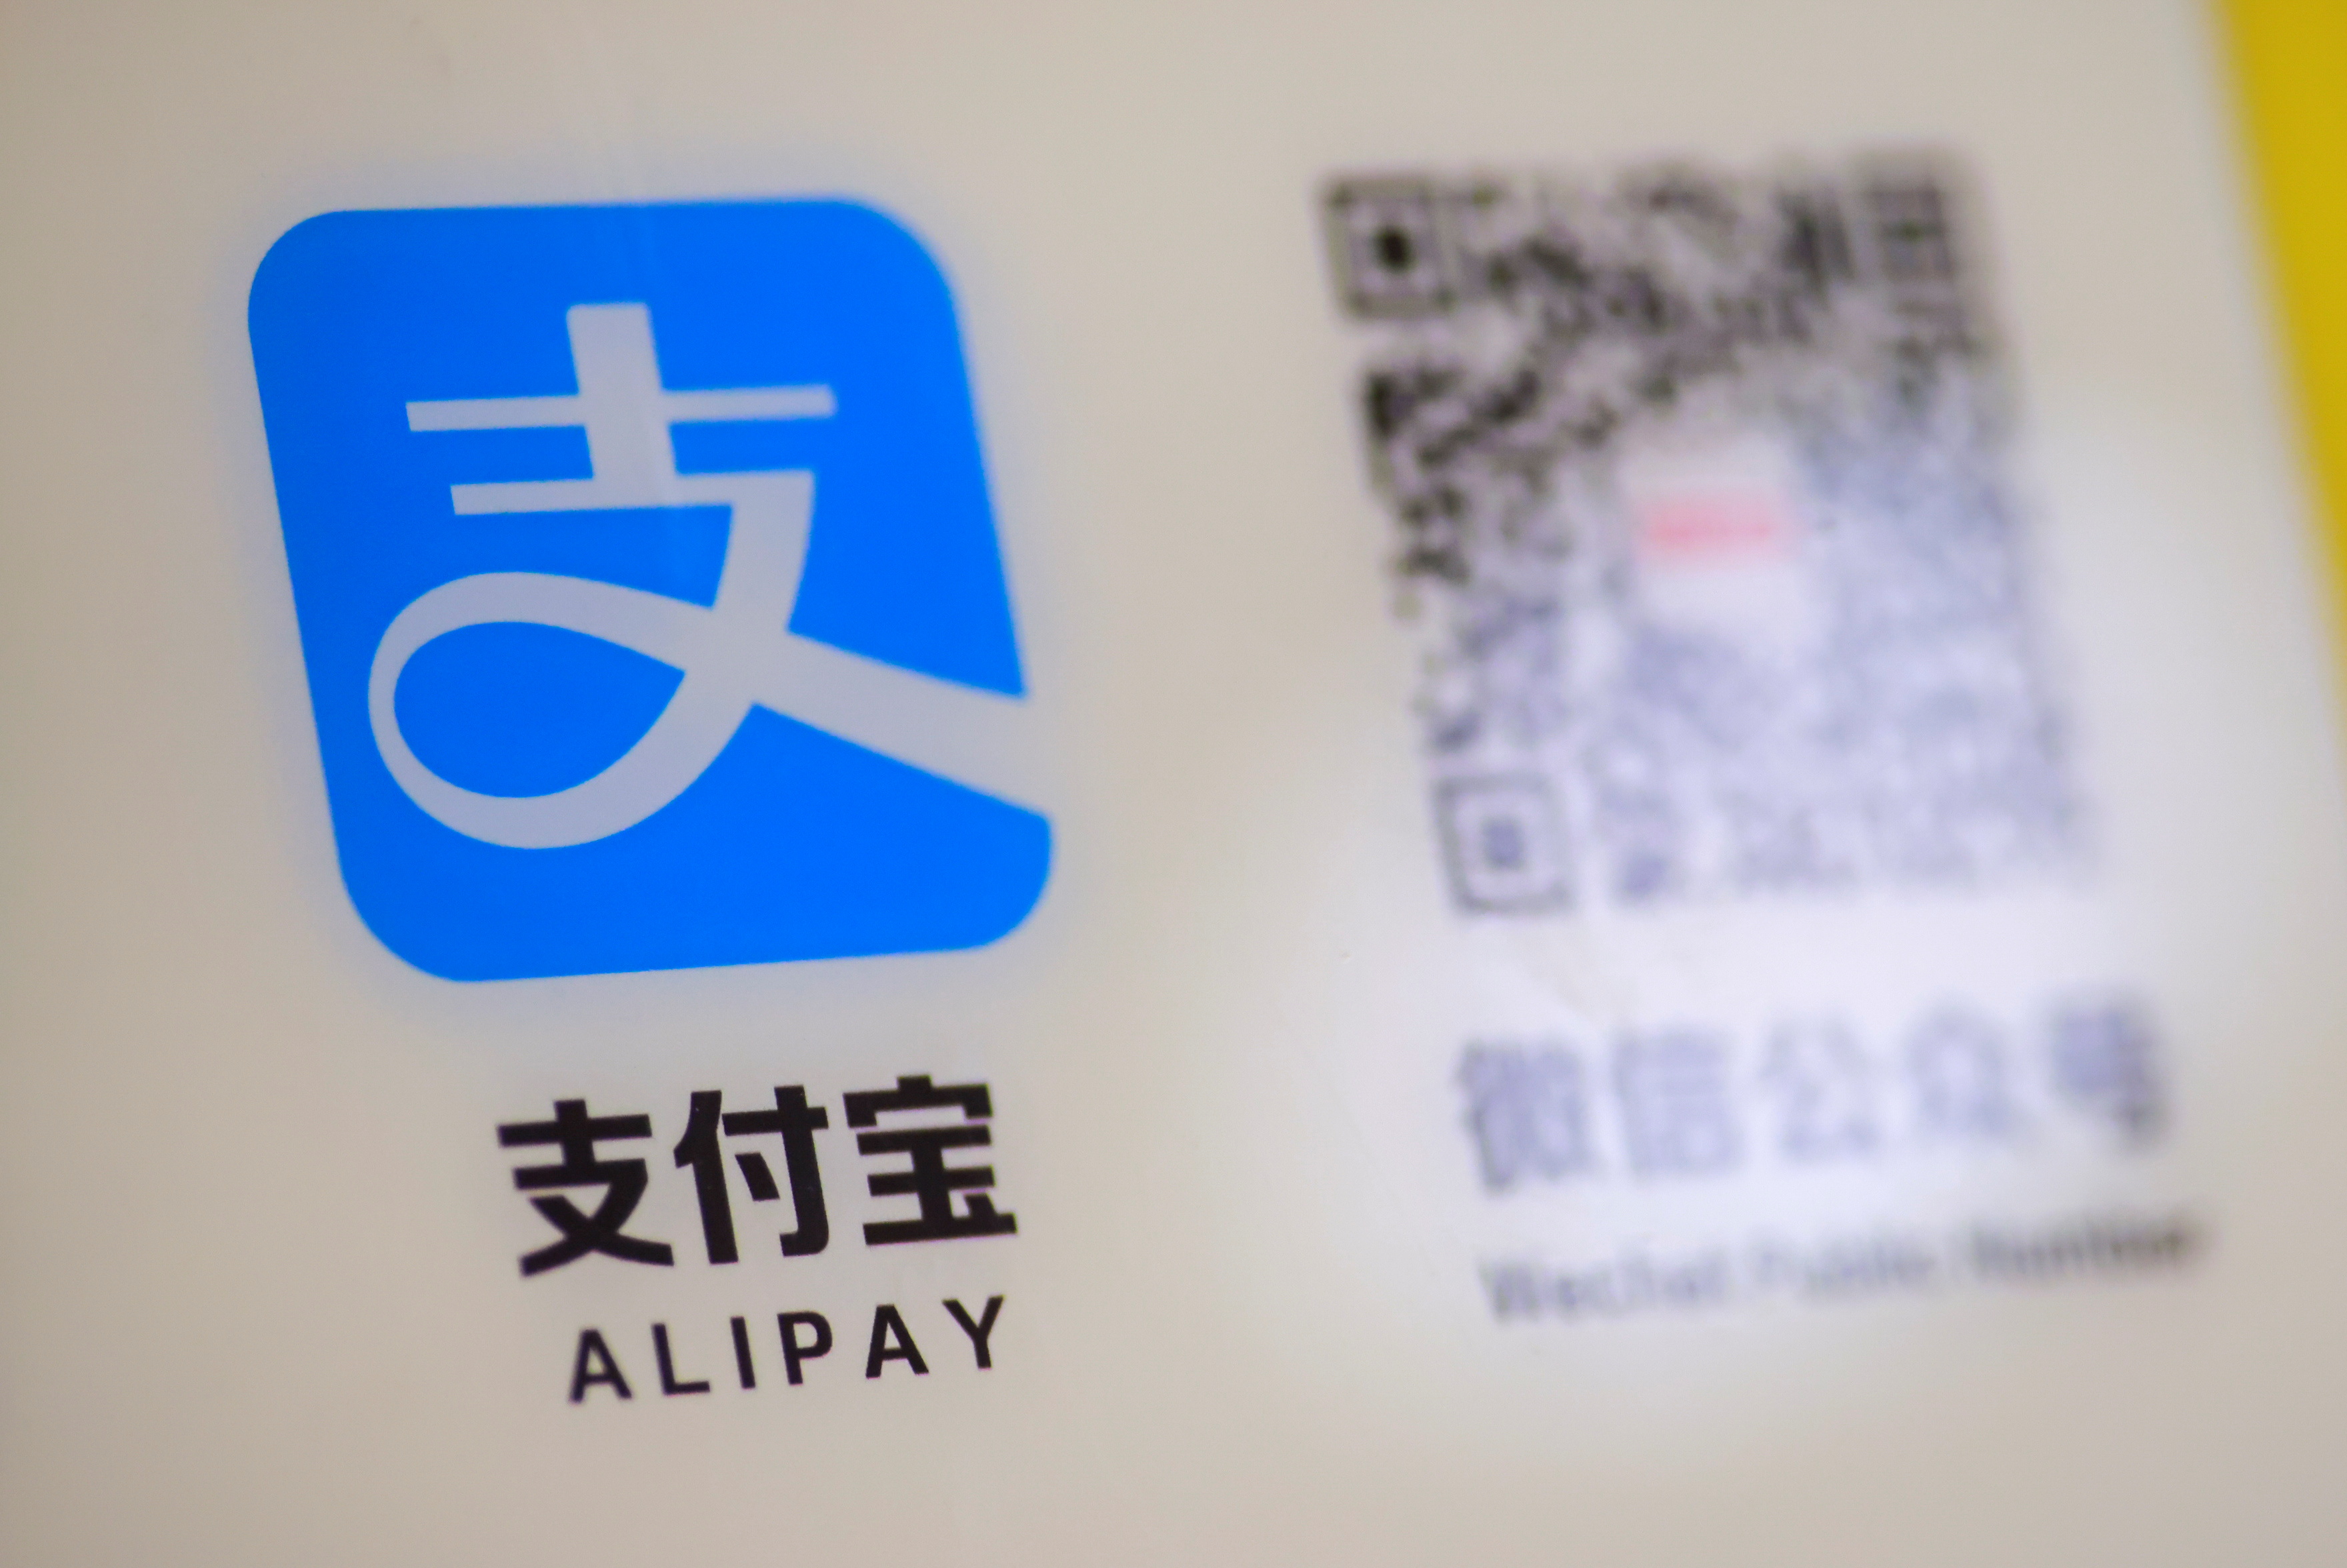 A logo of the electronic payment service Alipay that belongs to Ant Group Co Ltd  is seen at a vending machine in Beijing